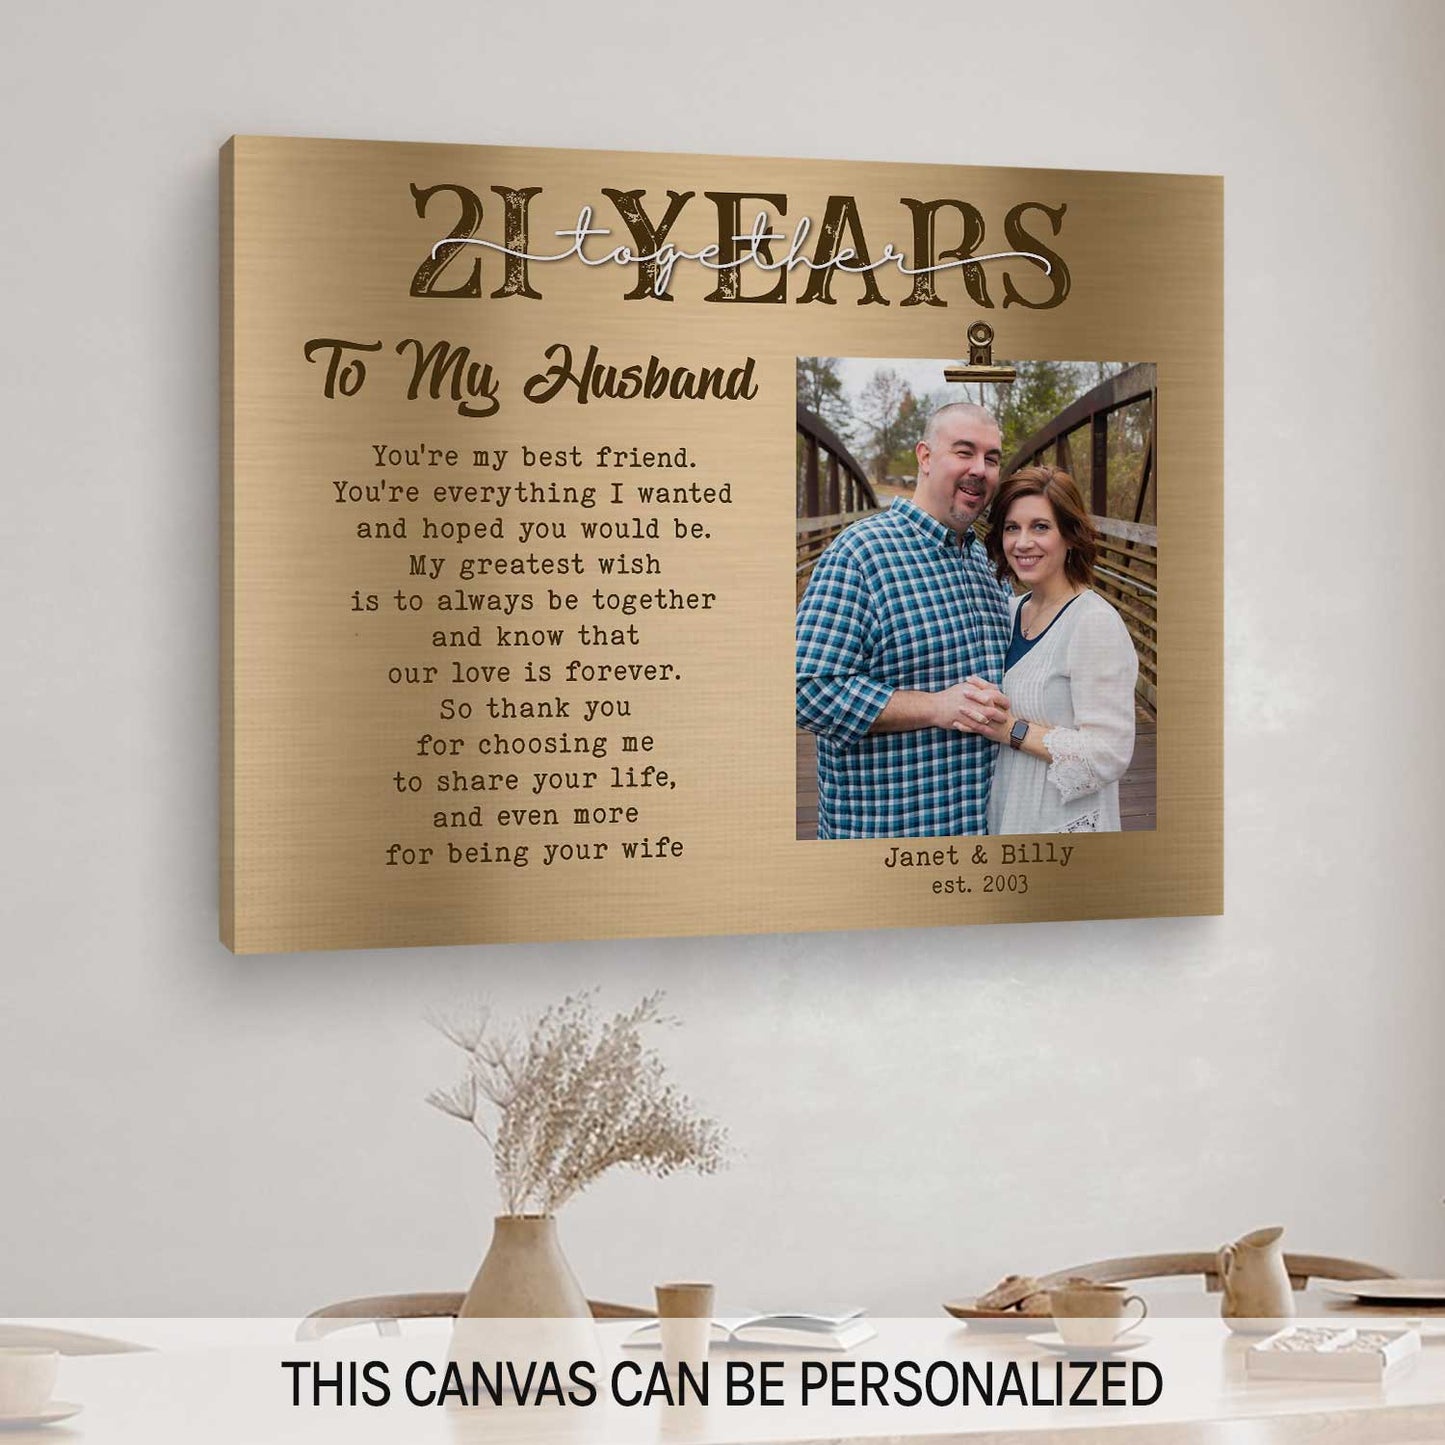 21 Years Together - Personalized 21 Year Anniversary gift For Husband - Custom Canvas Print - MyMindfulGifts